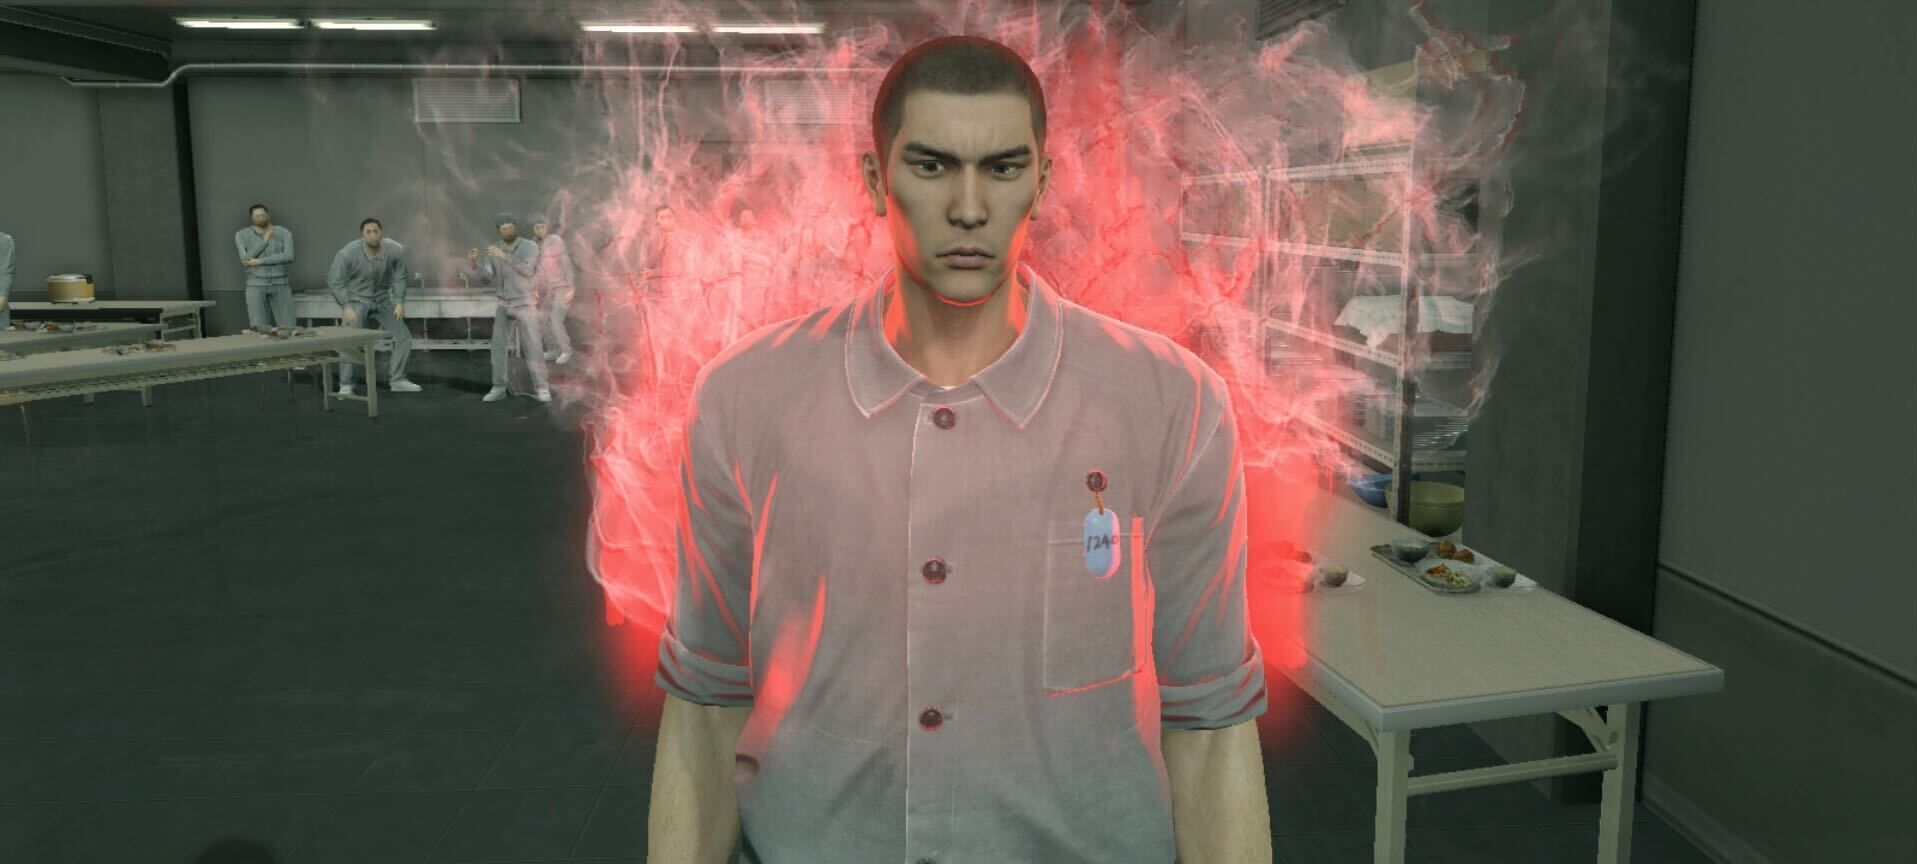 A man with a misty, glowing red aura